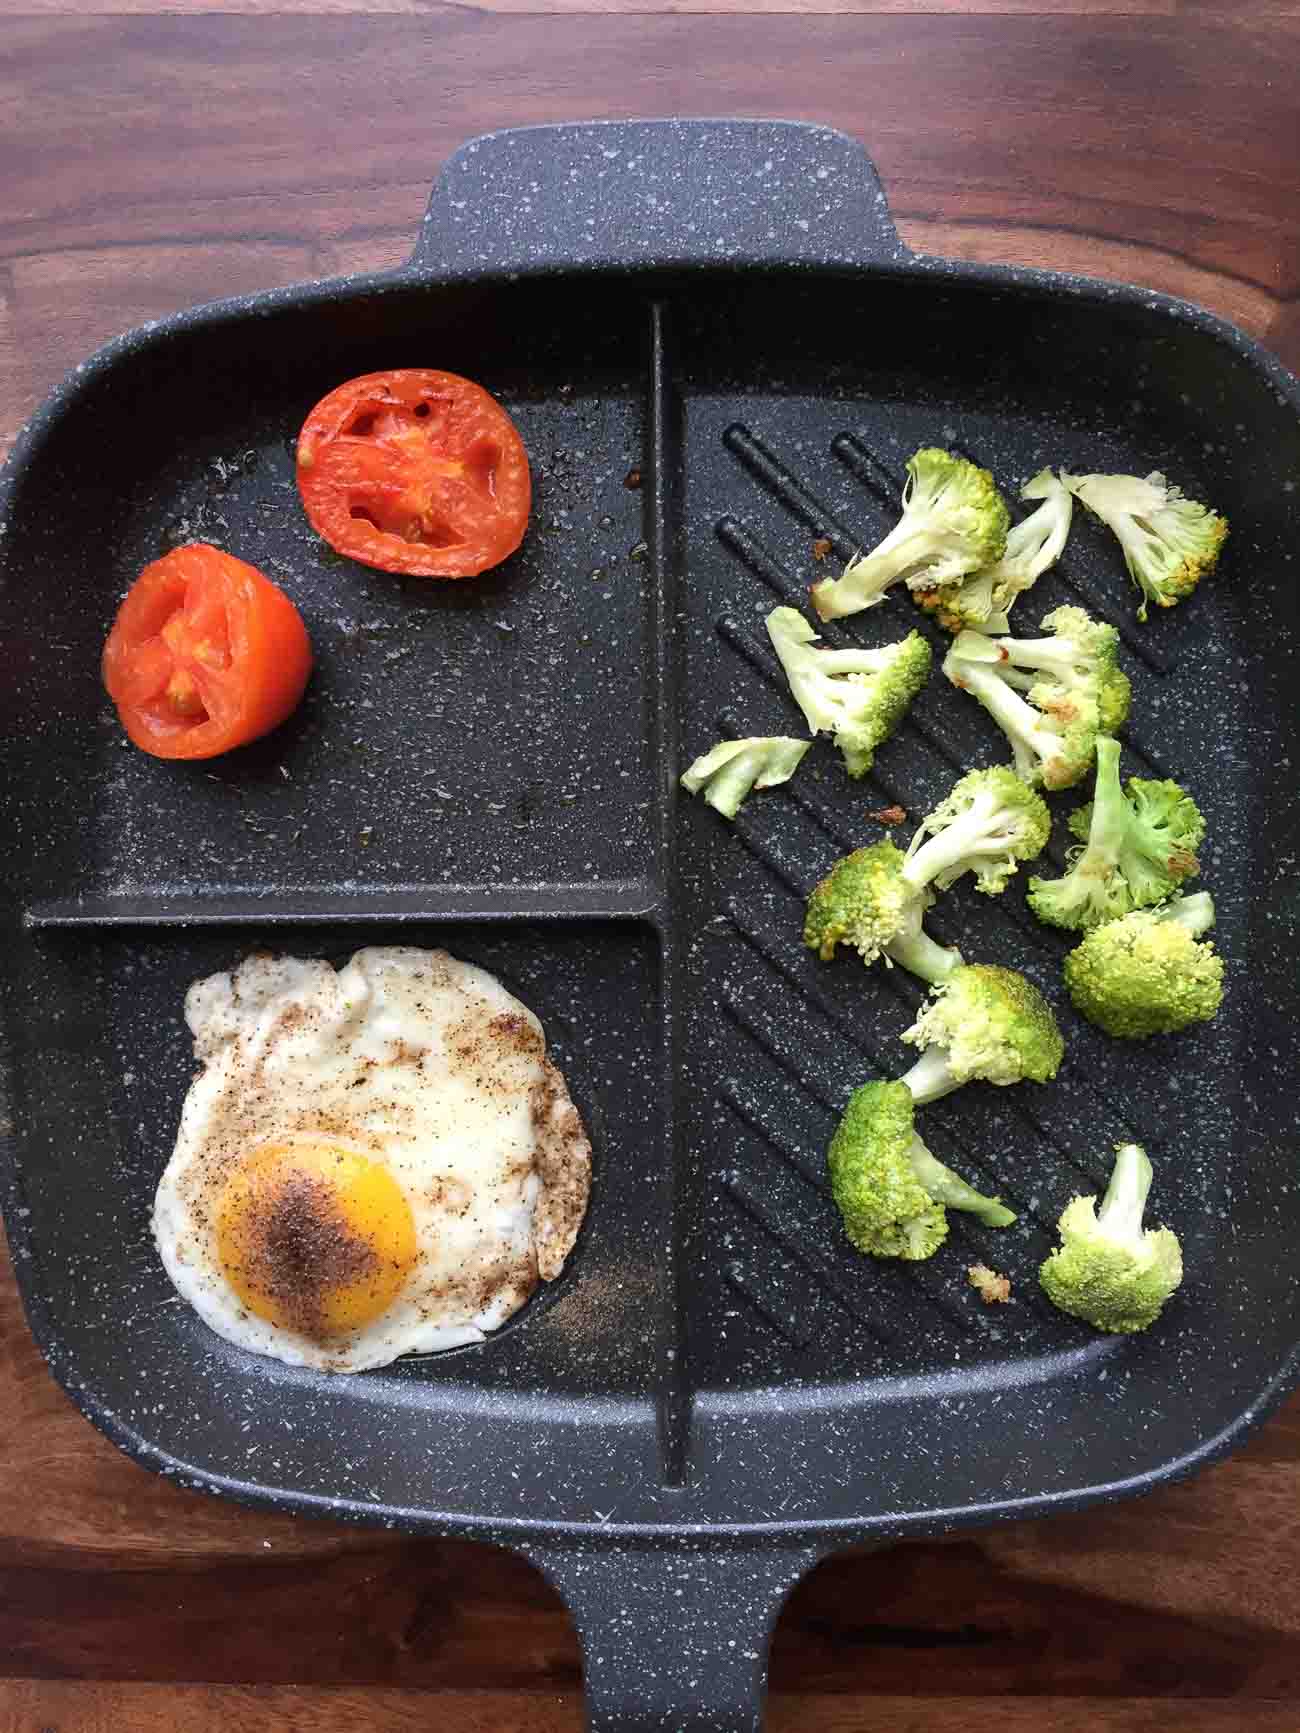 Home Center Multi Grill Pan 1